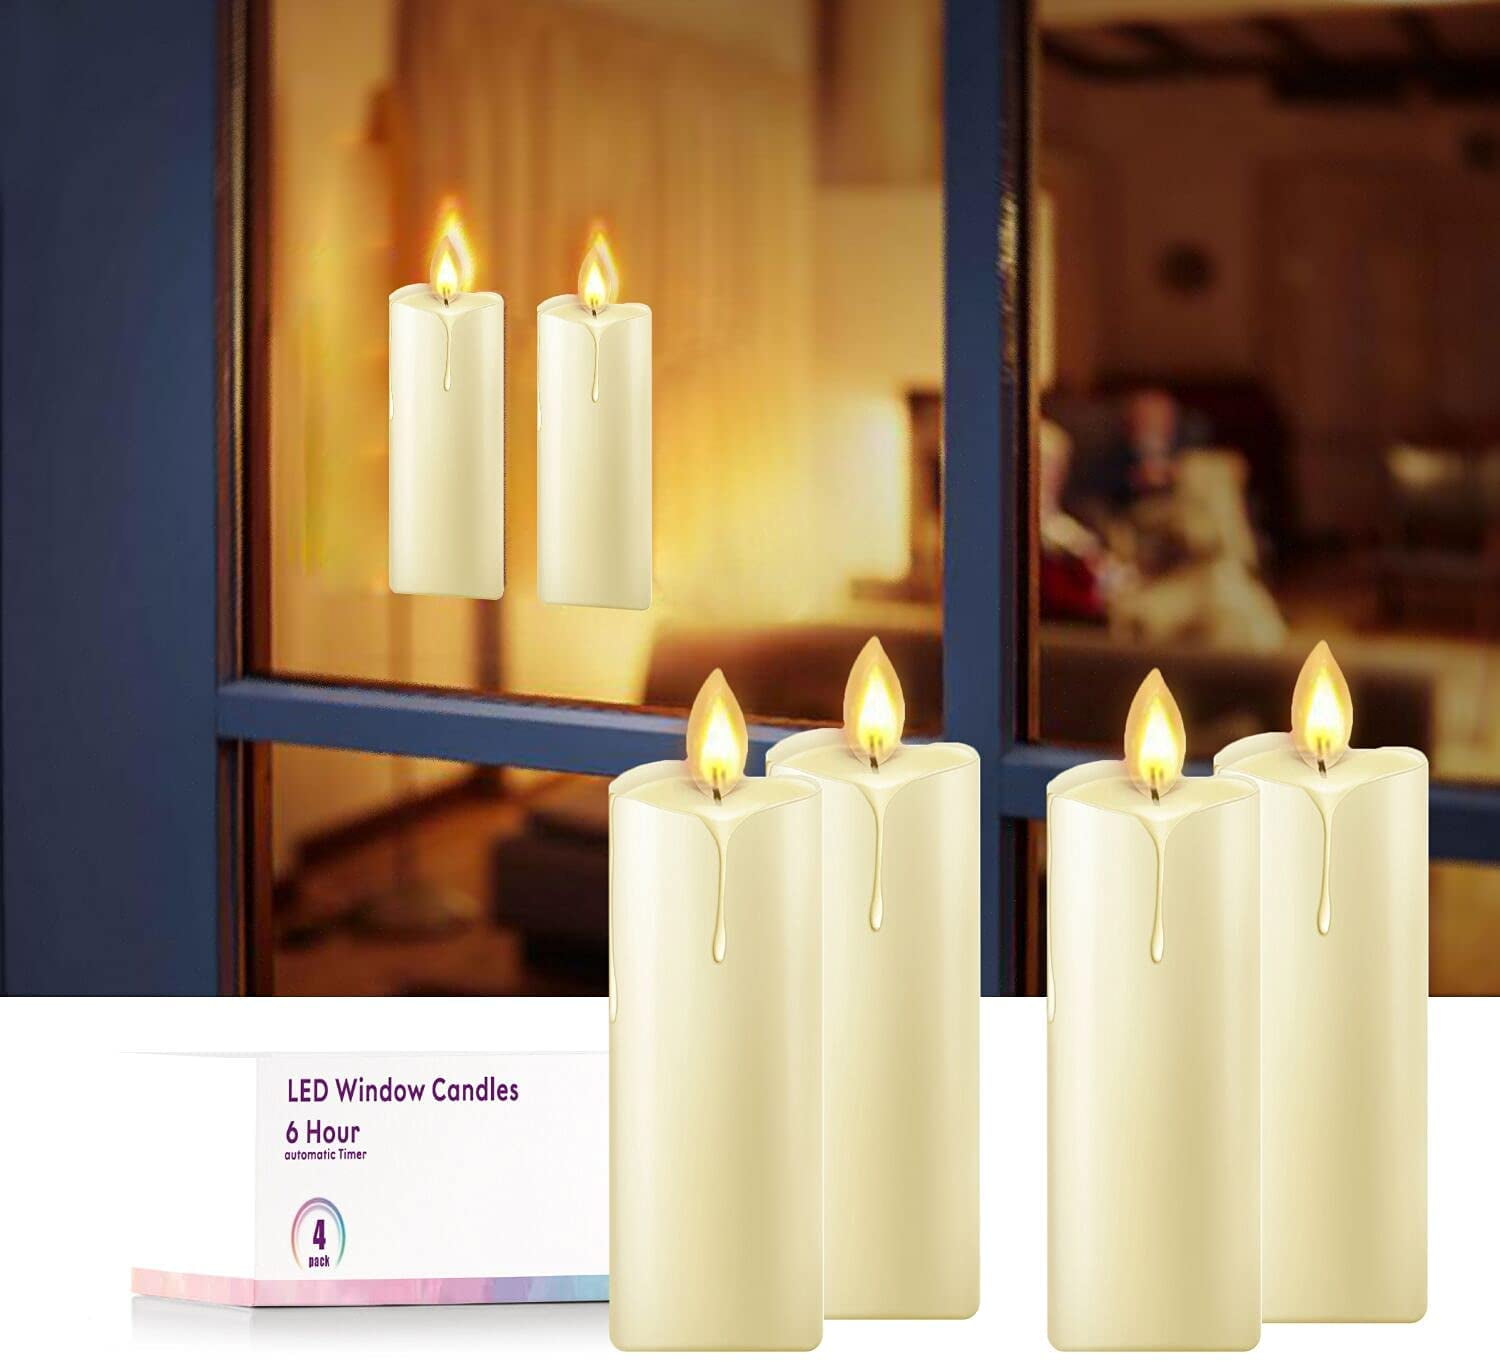 4 pack LED Flameless Flickering Tapered Candles Battery Operated w/Remote White 